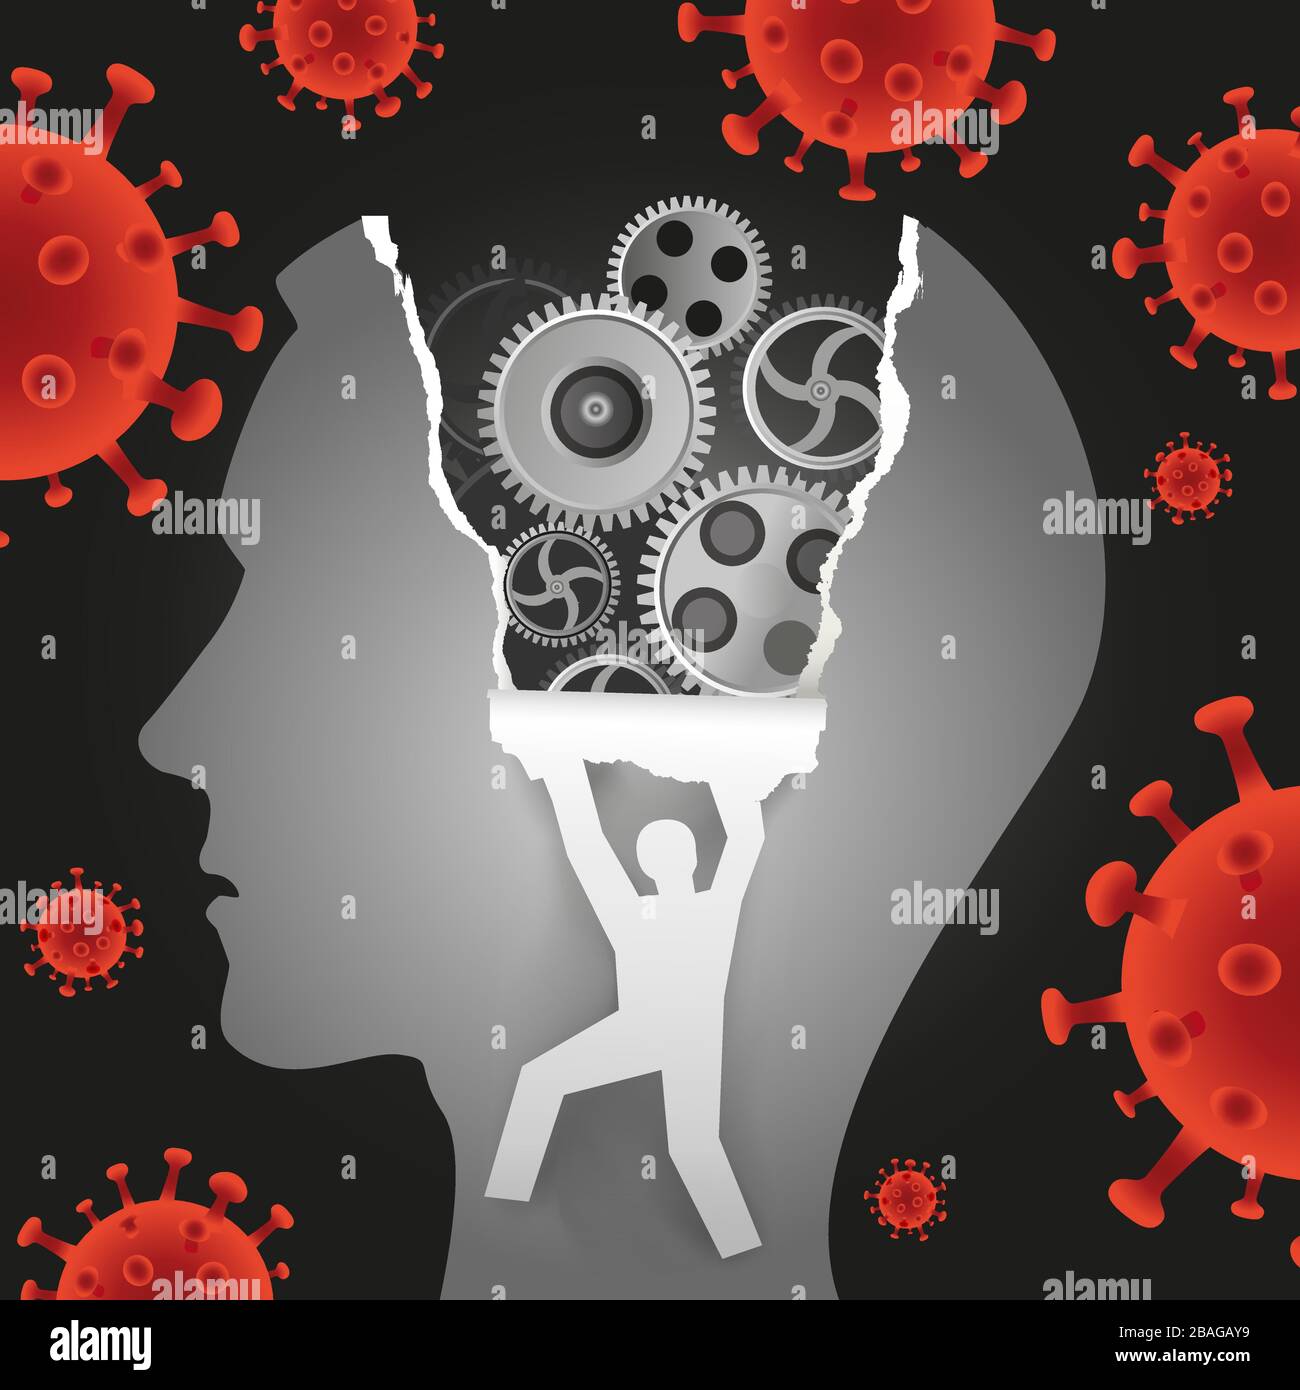 Psychological examination, depression during coronavirus pandemic. Male head in profile with gear and male silhouette ripping paper  with coronavirus. Stock Vector